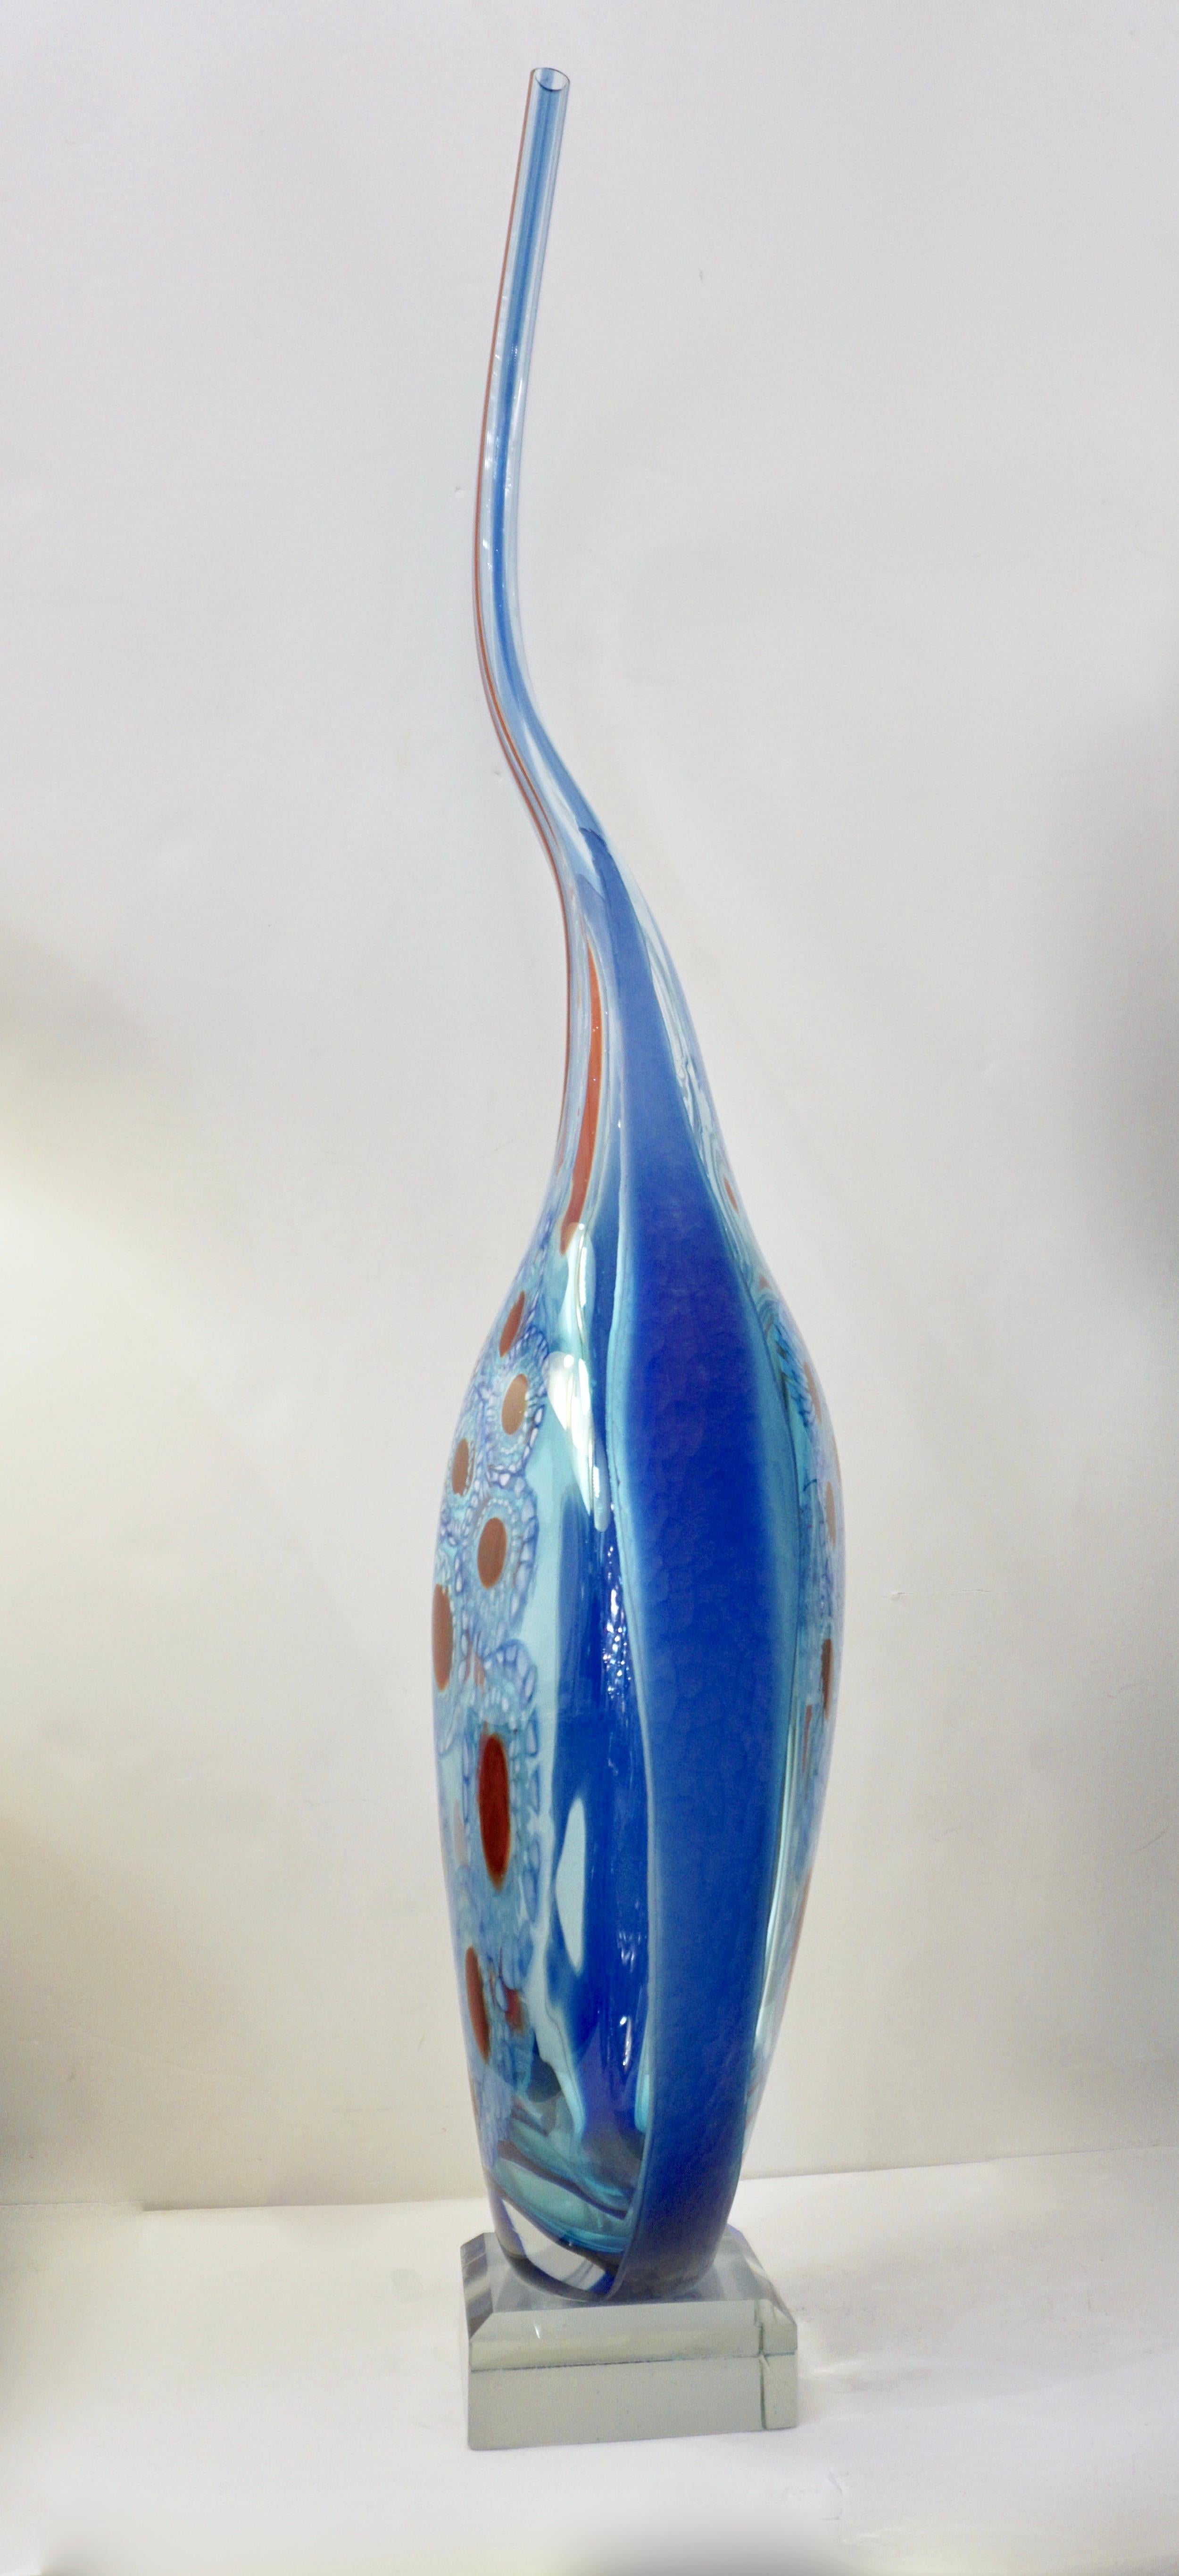 Monumental Italian Art glass vase, one of a kind Work of Art by Davide Donà, signed piece in blown Murano glass. The aquamarine body tinted with blue reflections is skillfully embraced by overlaying turquoise sapphire blue sides and highlighted